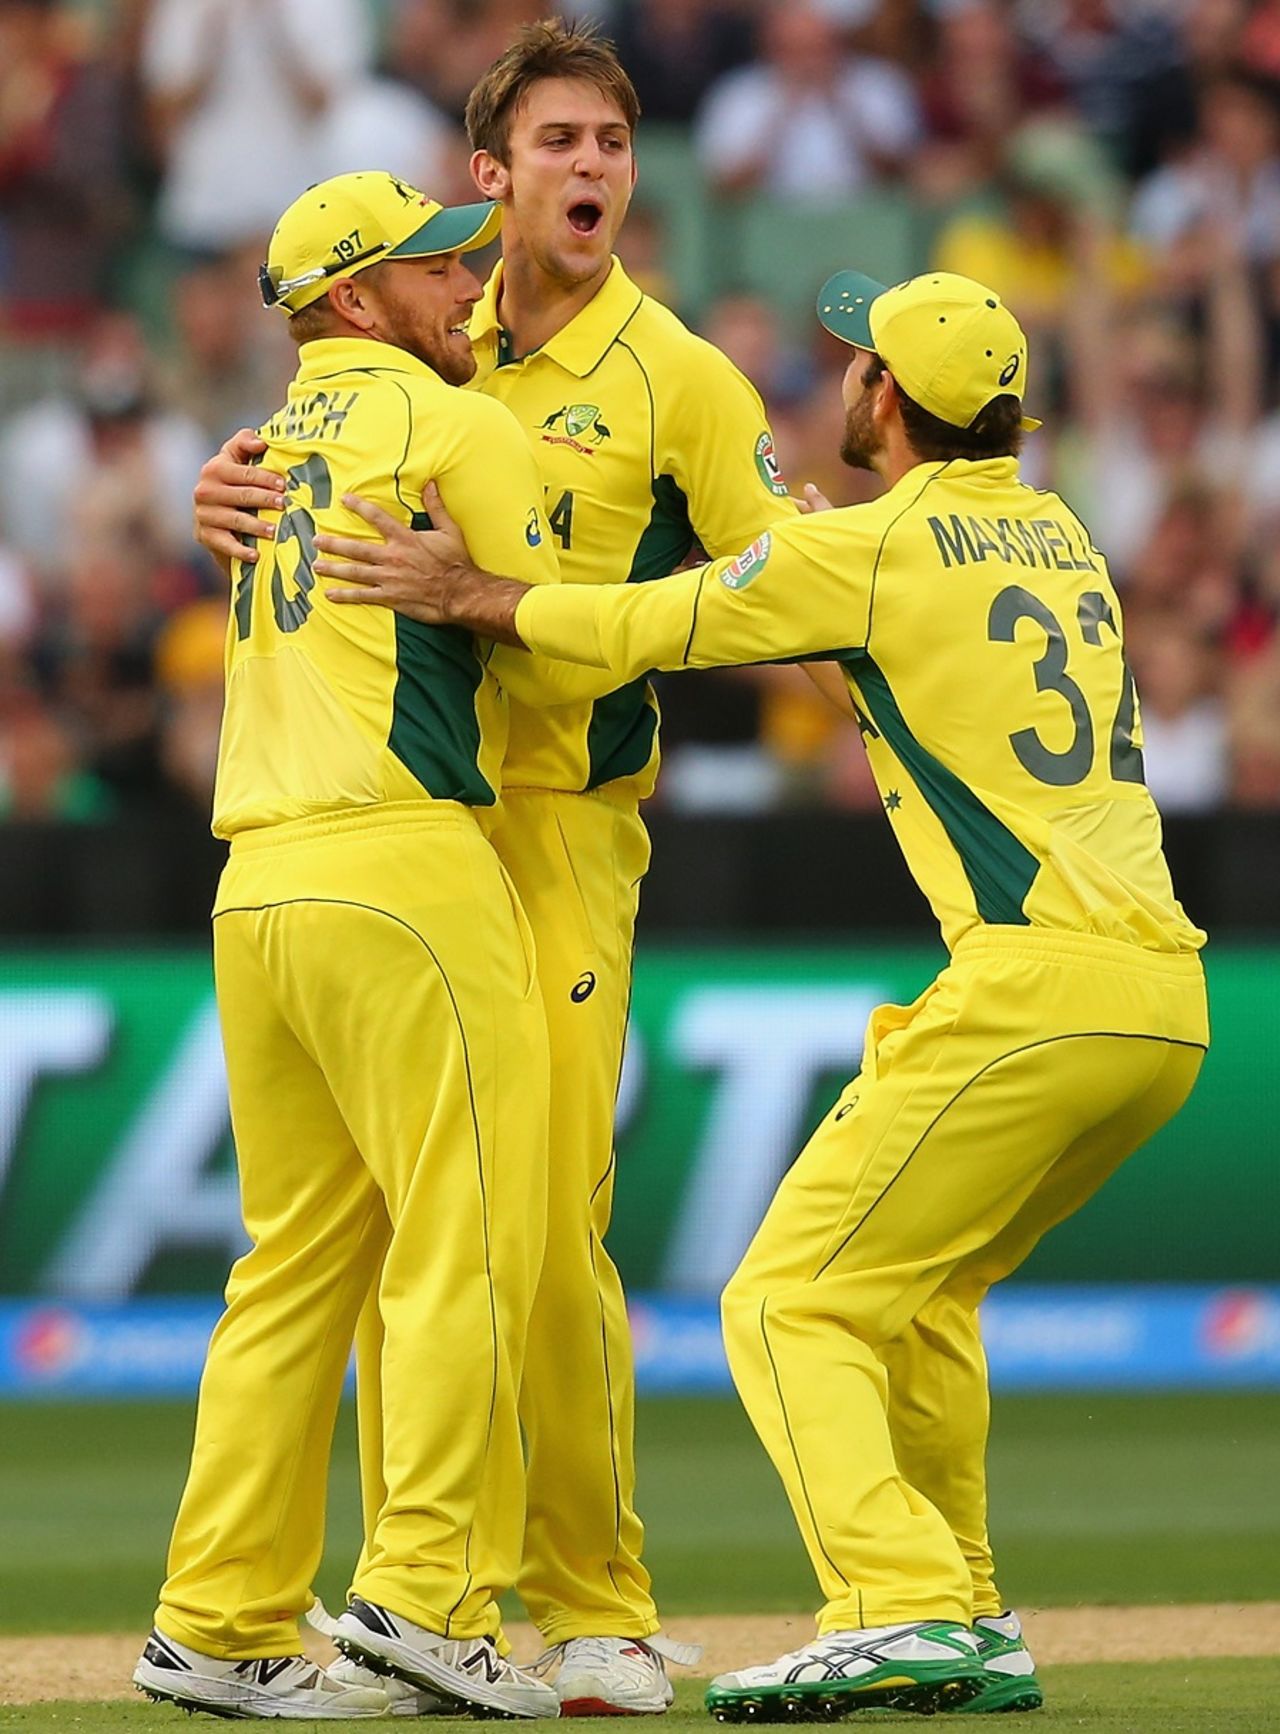 Mitchell Marsh exults after removing Gary Ballance, Australia v England, Group A, World Cup 2015, Melbourne, February 14, 2015